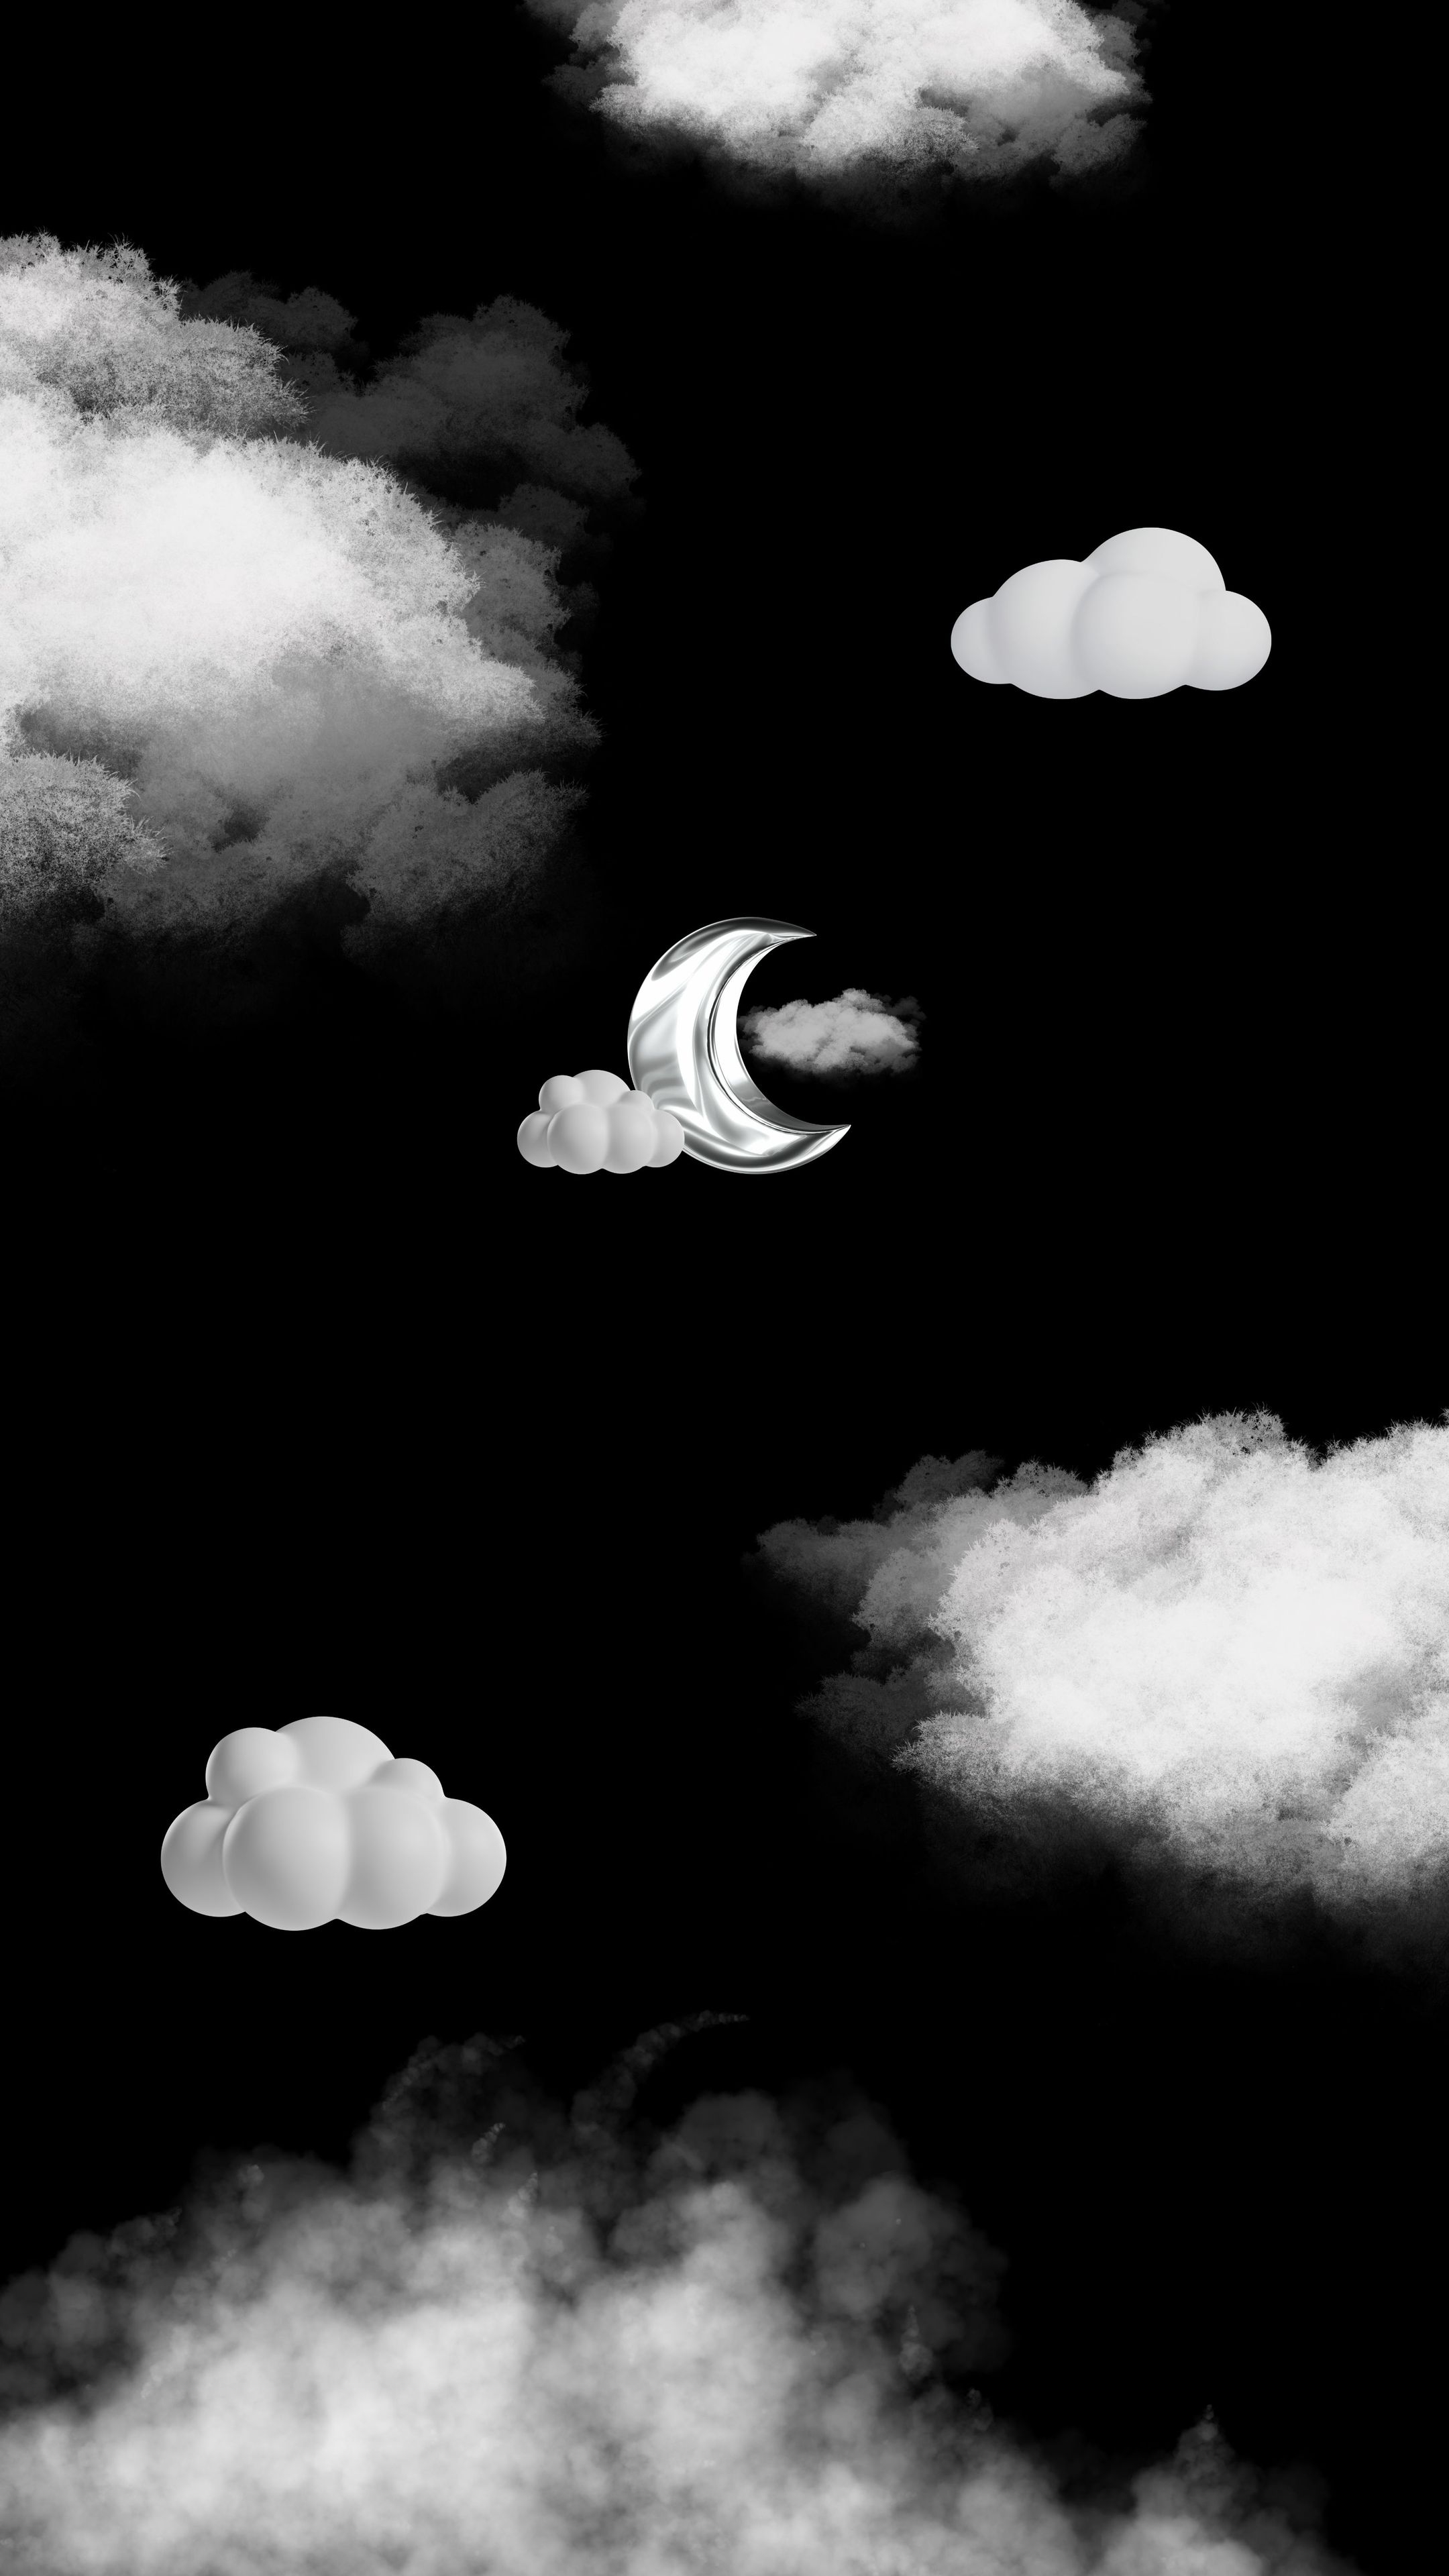 Dreamy Night Sky with Moon and Clouds Behang[7bf29b10e3cc452680c9]